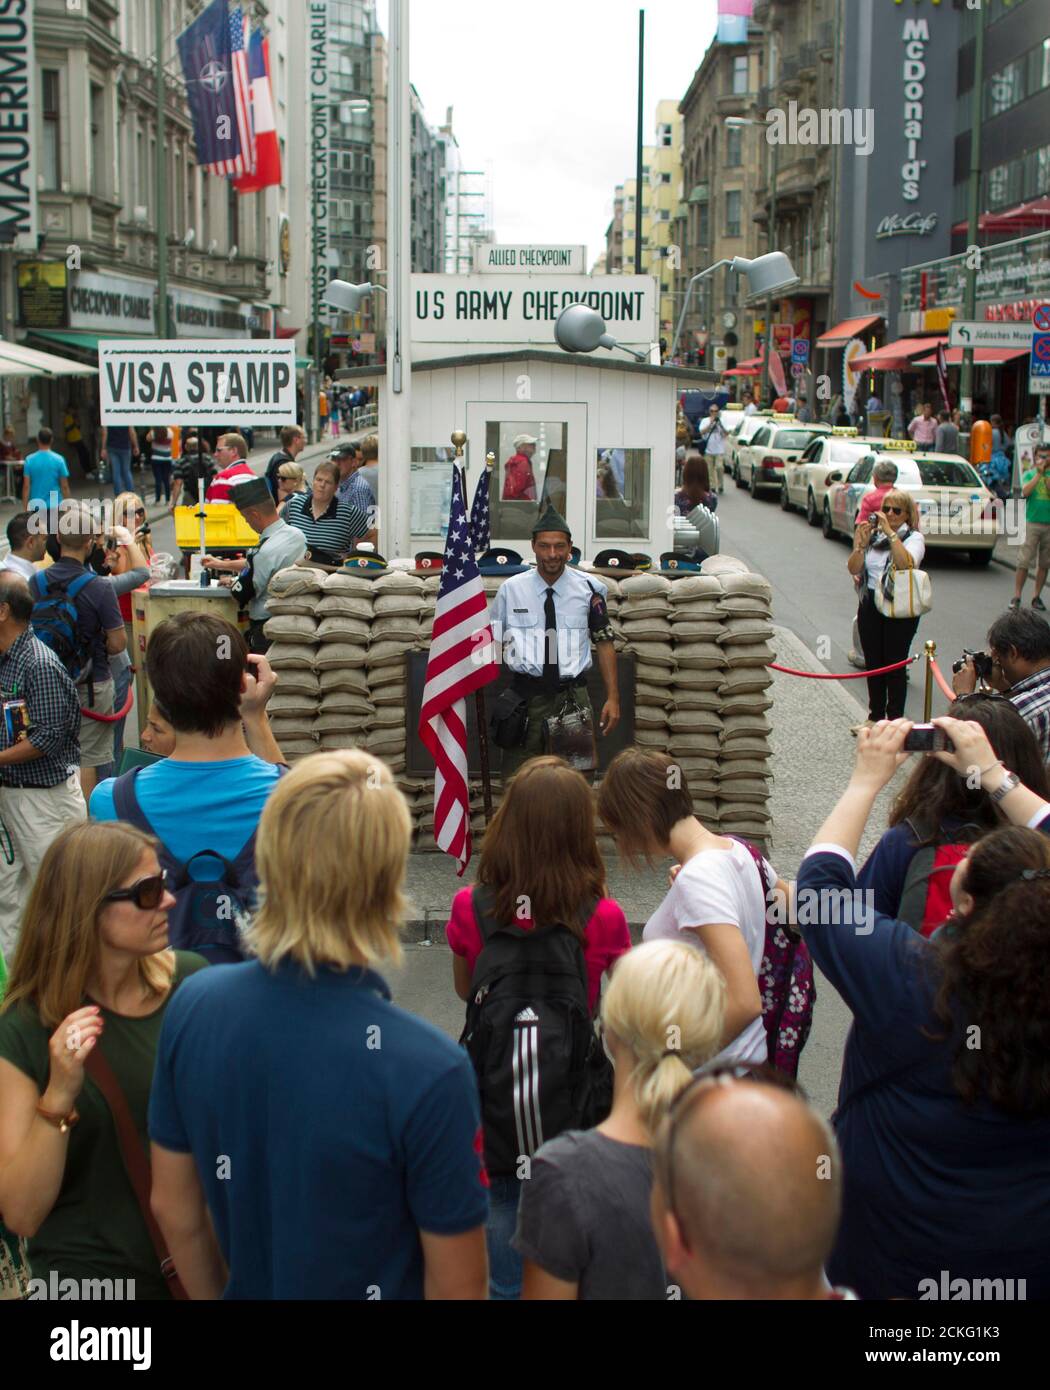 Tourists have their pictures taken at the former Checkpoint Charlie border crossing in Berlin, August 25, 2012.   More than two decades after the fall of the Berlin Wall, differences over how to represent the Cold War past are hampering plans to build a new museum at the former border crossing. Picture taken August 25, 2012. REUTERS/Thomas Peter (GERMANY  - Tags: TRAVEL SOCIETY POLITICS) Stock Photo